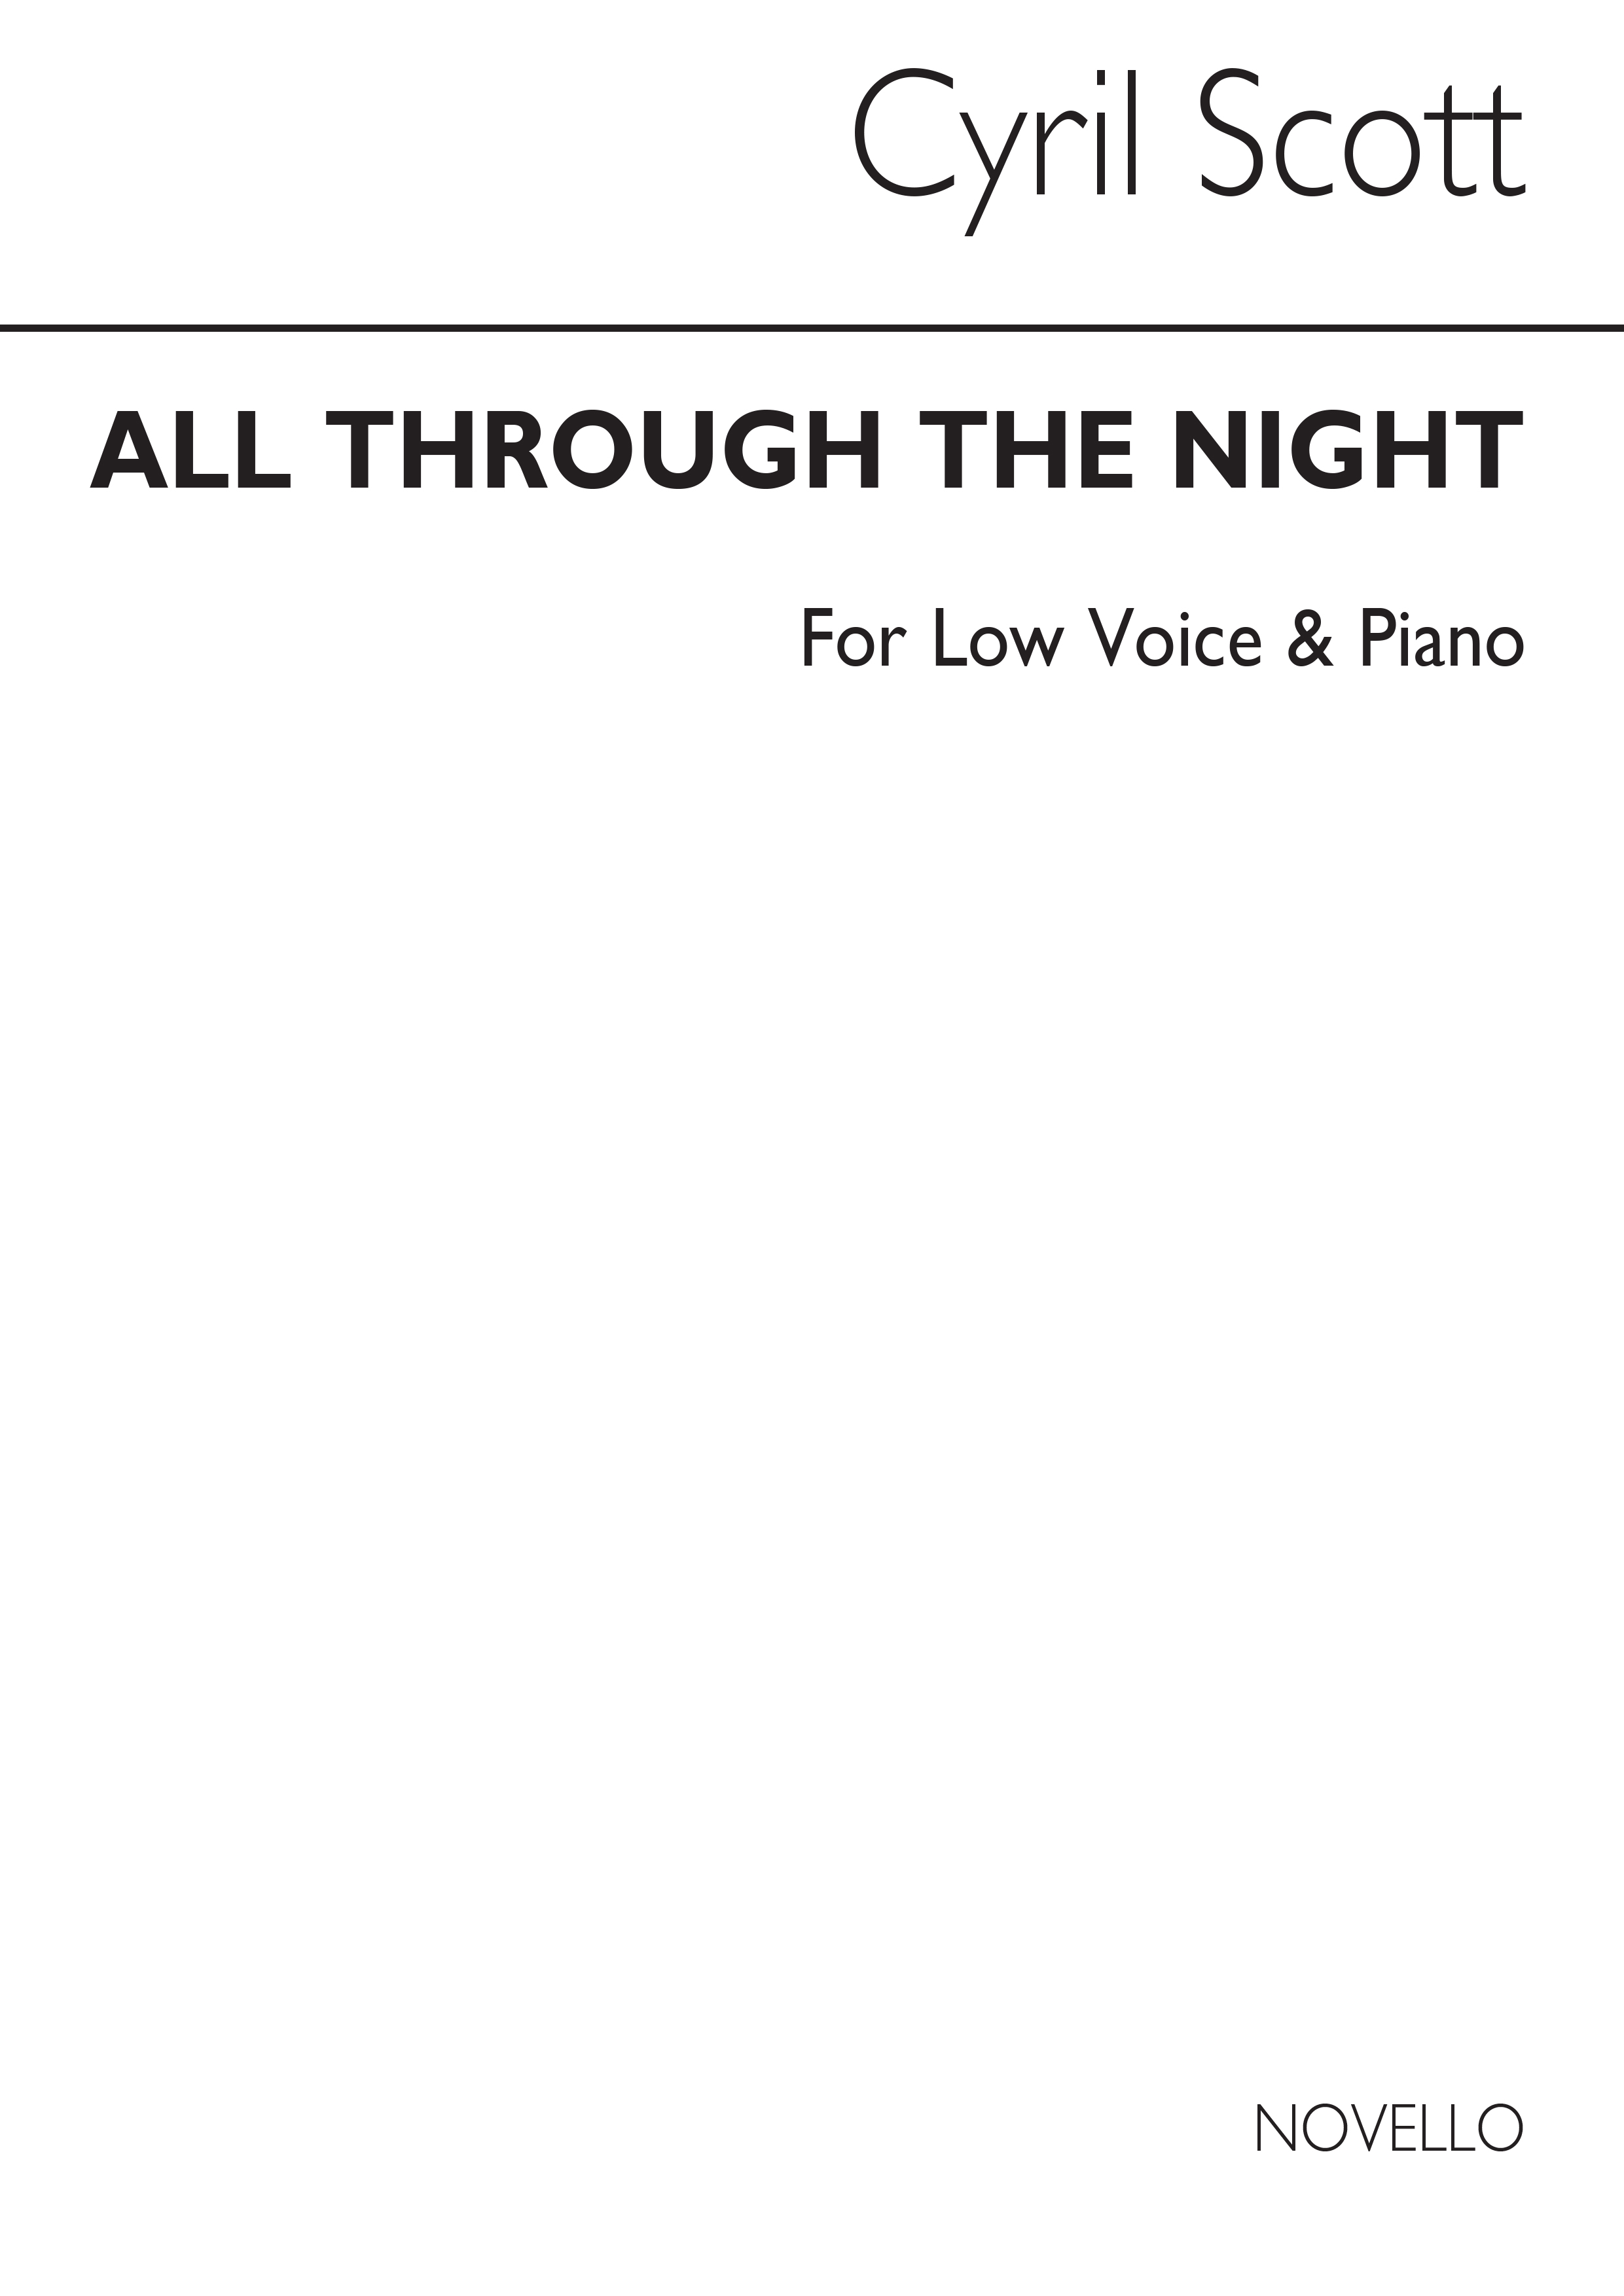 Cyril Scott: All Through The Night-low Voice/Piano (Key-g)